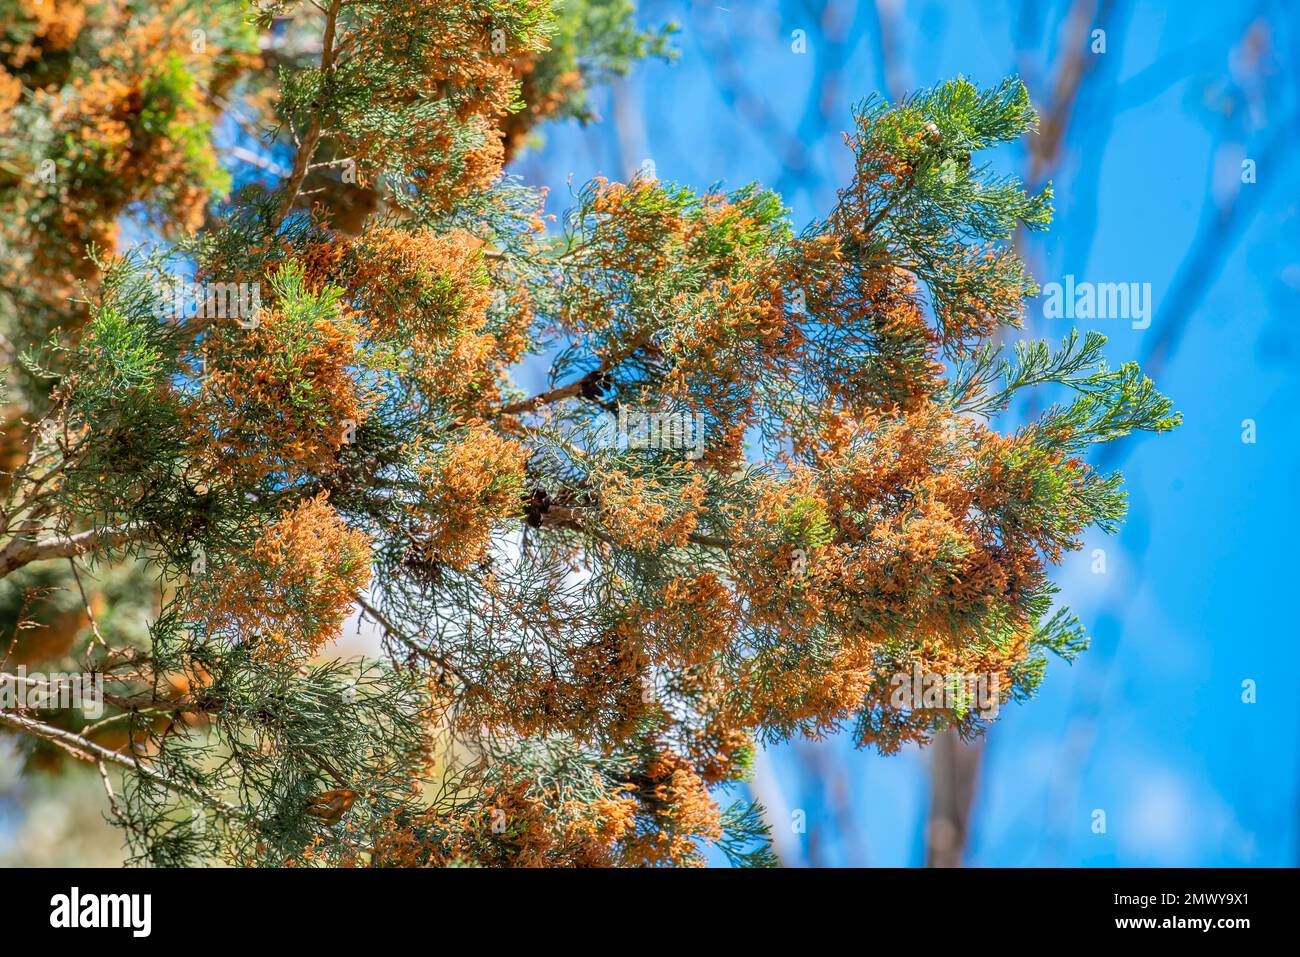 An Australian Native Cyprus Pine (CALLITRIS glaucophylla) also known as a White Cyrpus, Murray River cypress-pine, and northern cypress-pine Stock Photo